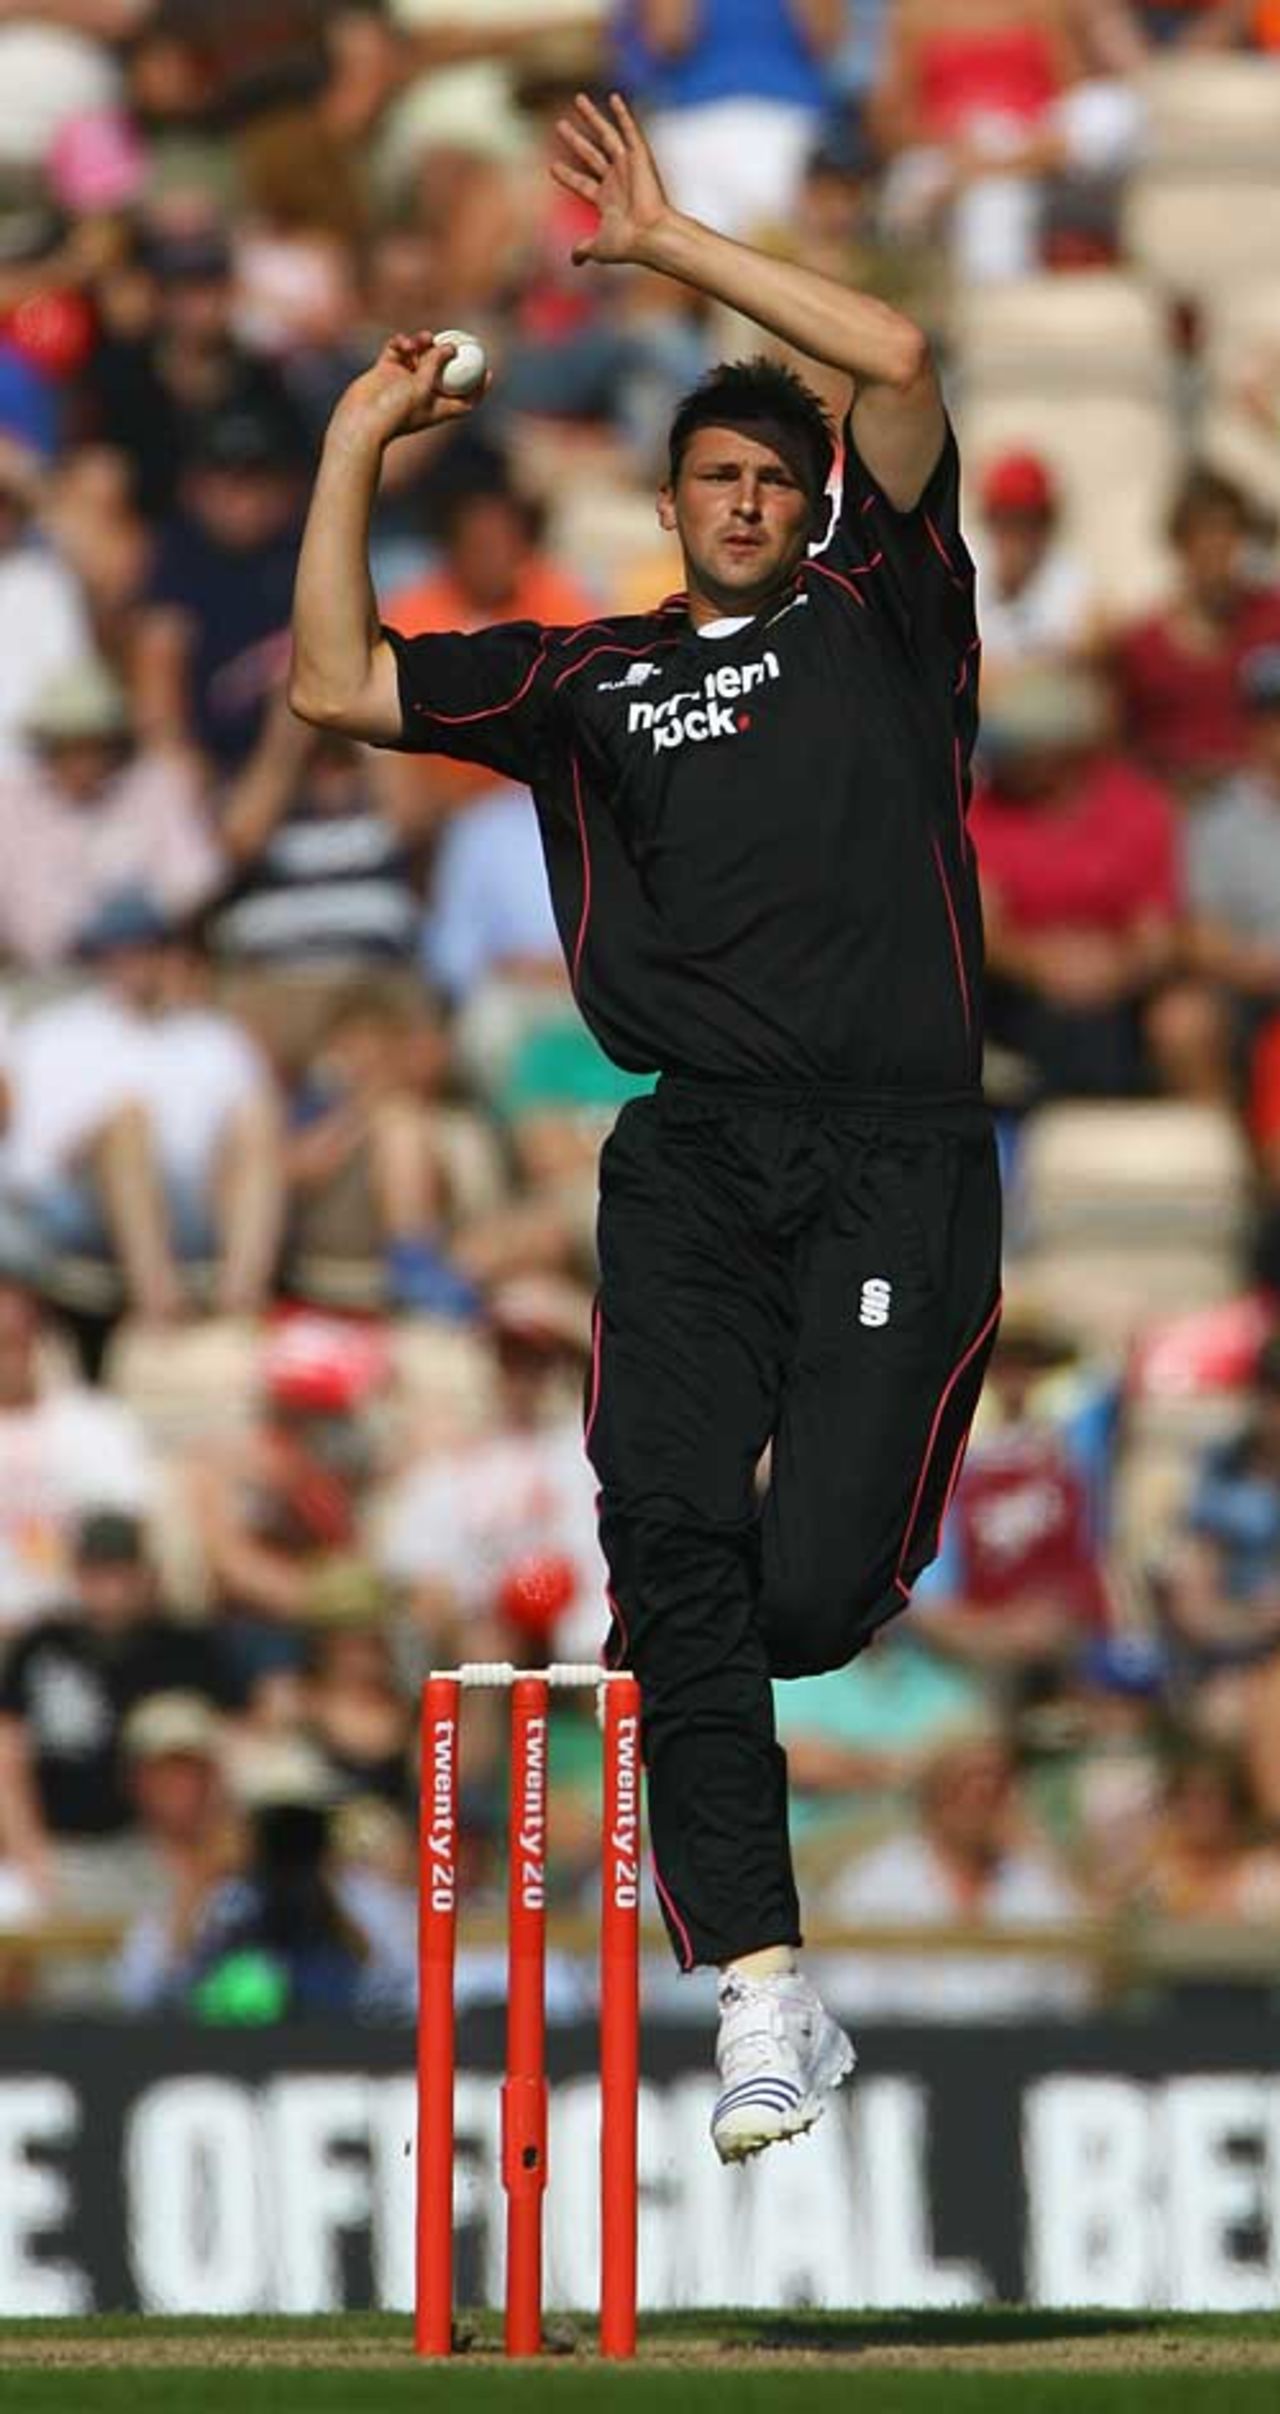 Steve Harmison was taken to the cleaners by Tyron Henderson, Durham v Middlesex, 2nd Twenty20 semi-final, The Rose Bowl, July 26, 2008